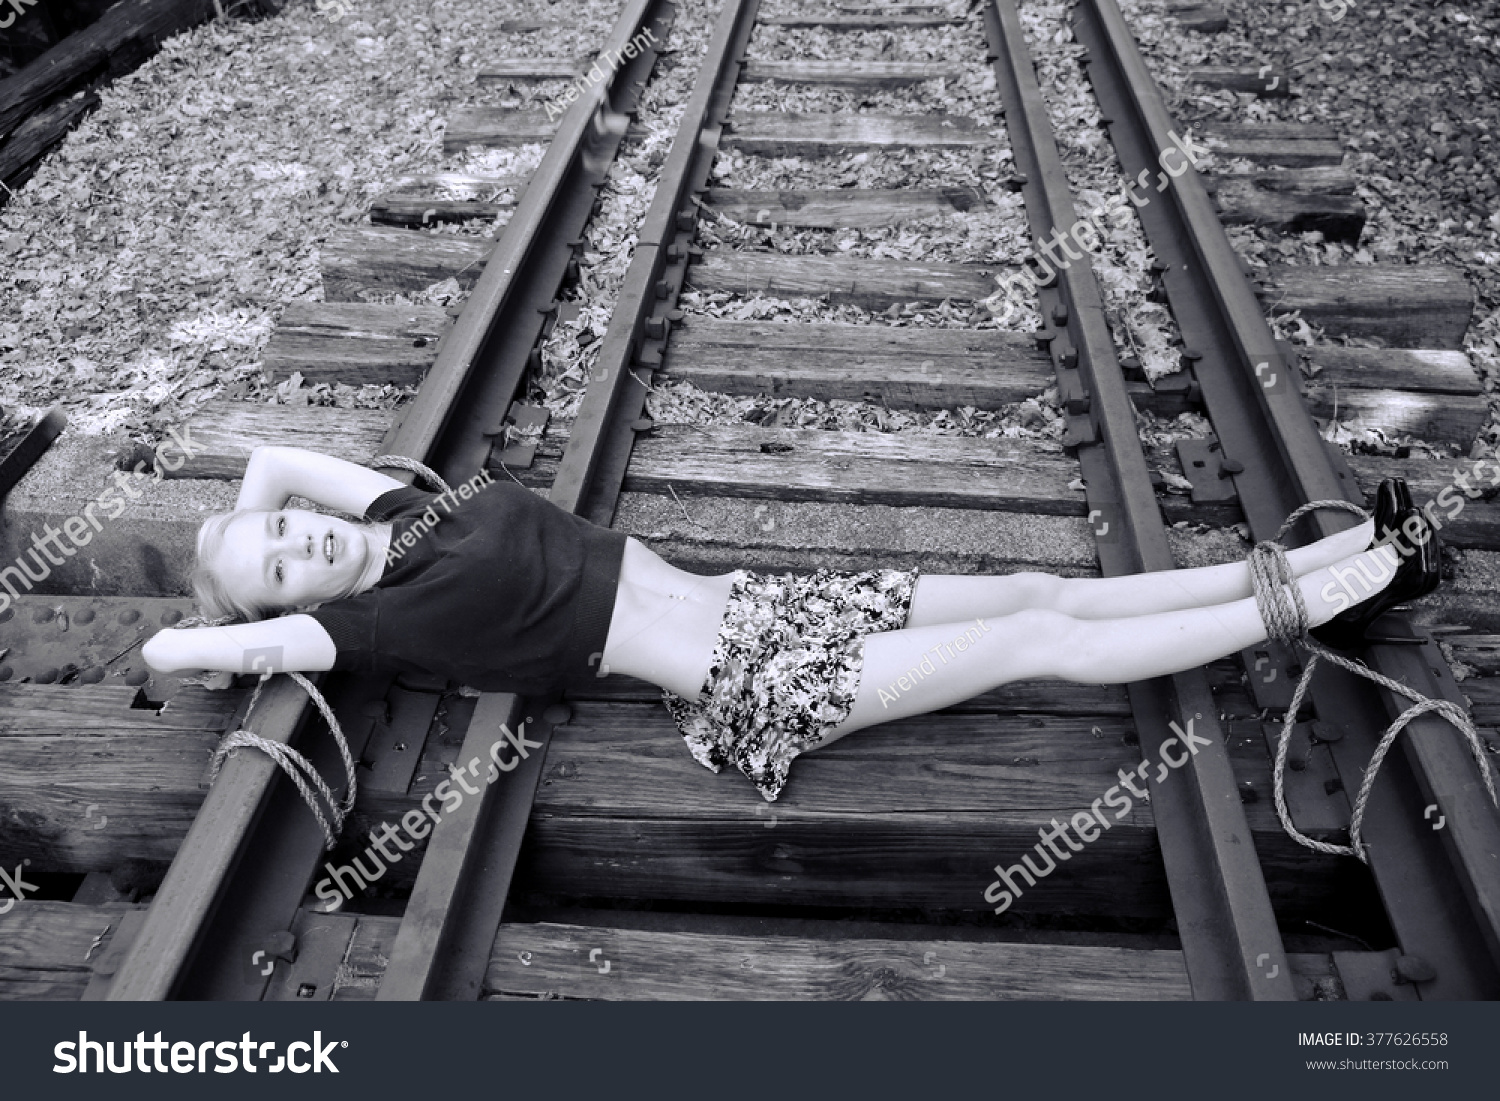 Man Tied to Train Track Images, Stock Photos & Vectors 